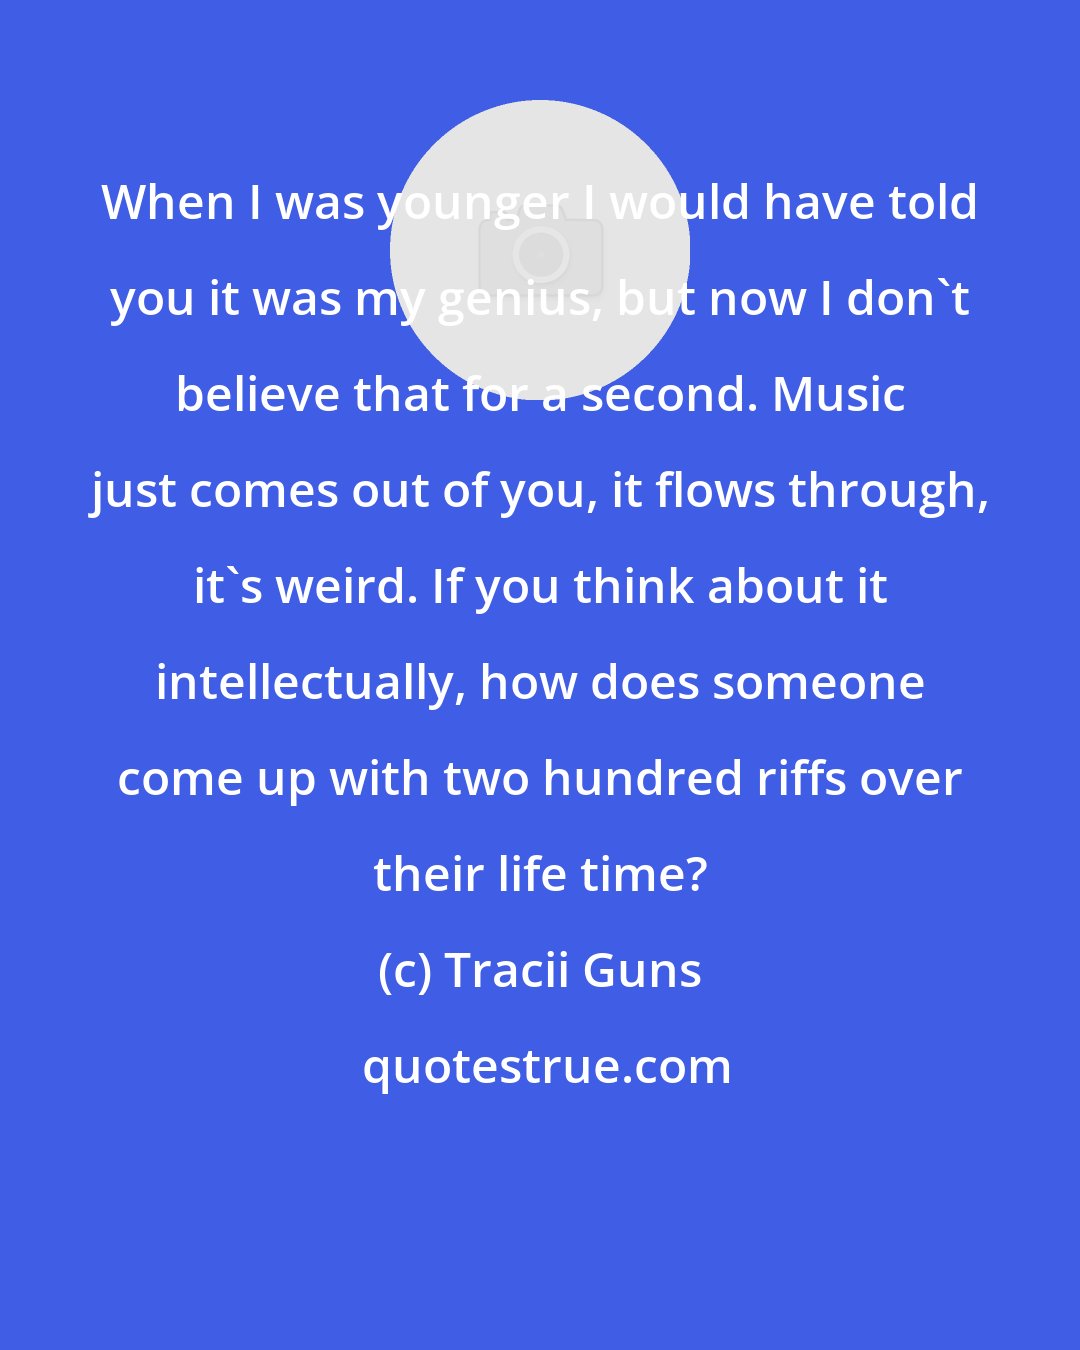 Tracii Guns: When I was younger I would have told you it was my genius, but now I don't believe that for a second. Music just comes out of you, it flows through, it's weird. If you think about it intellectually, how does someone come up with two hundred riffs over their life time?